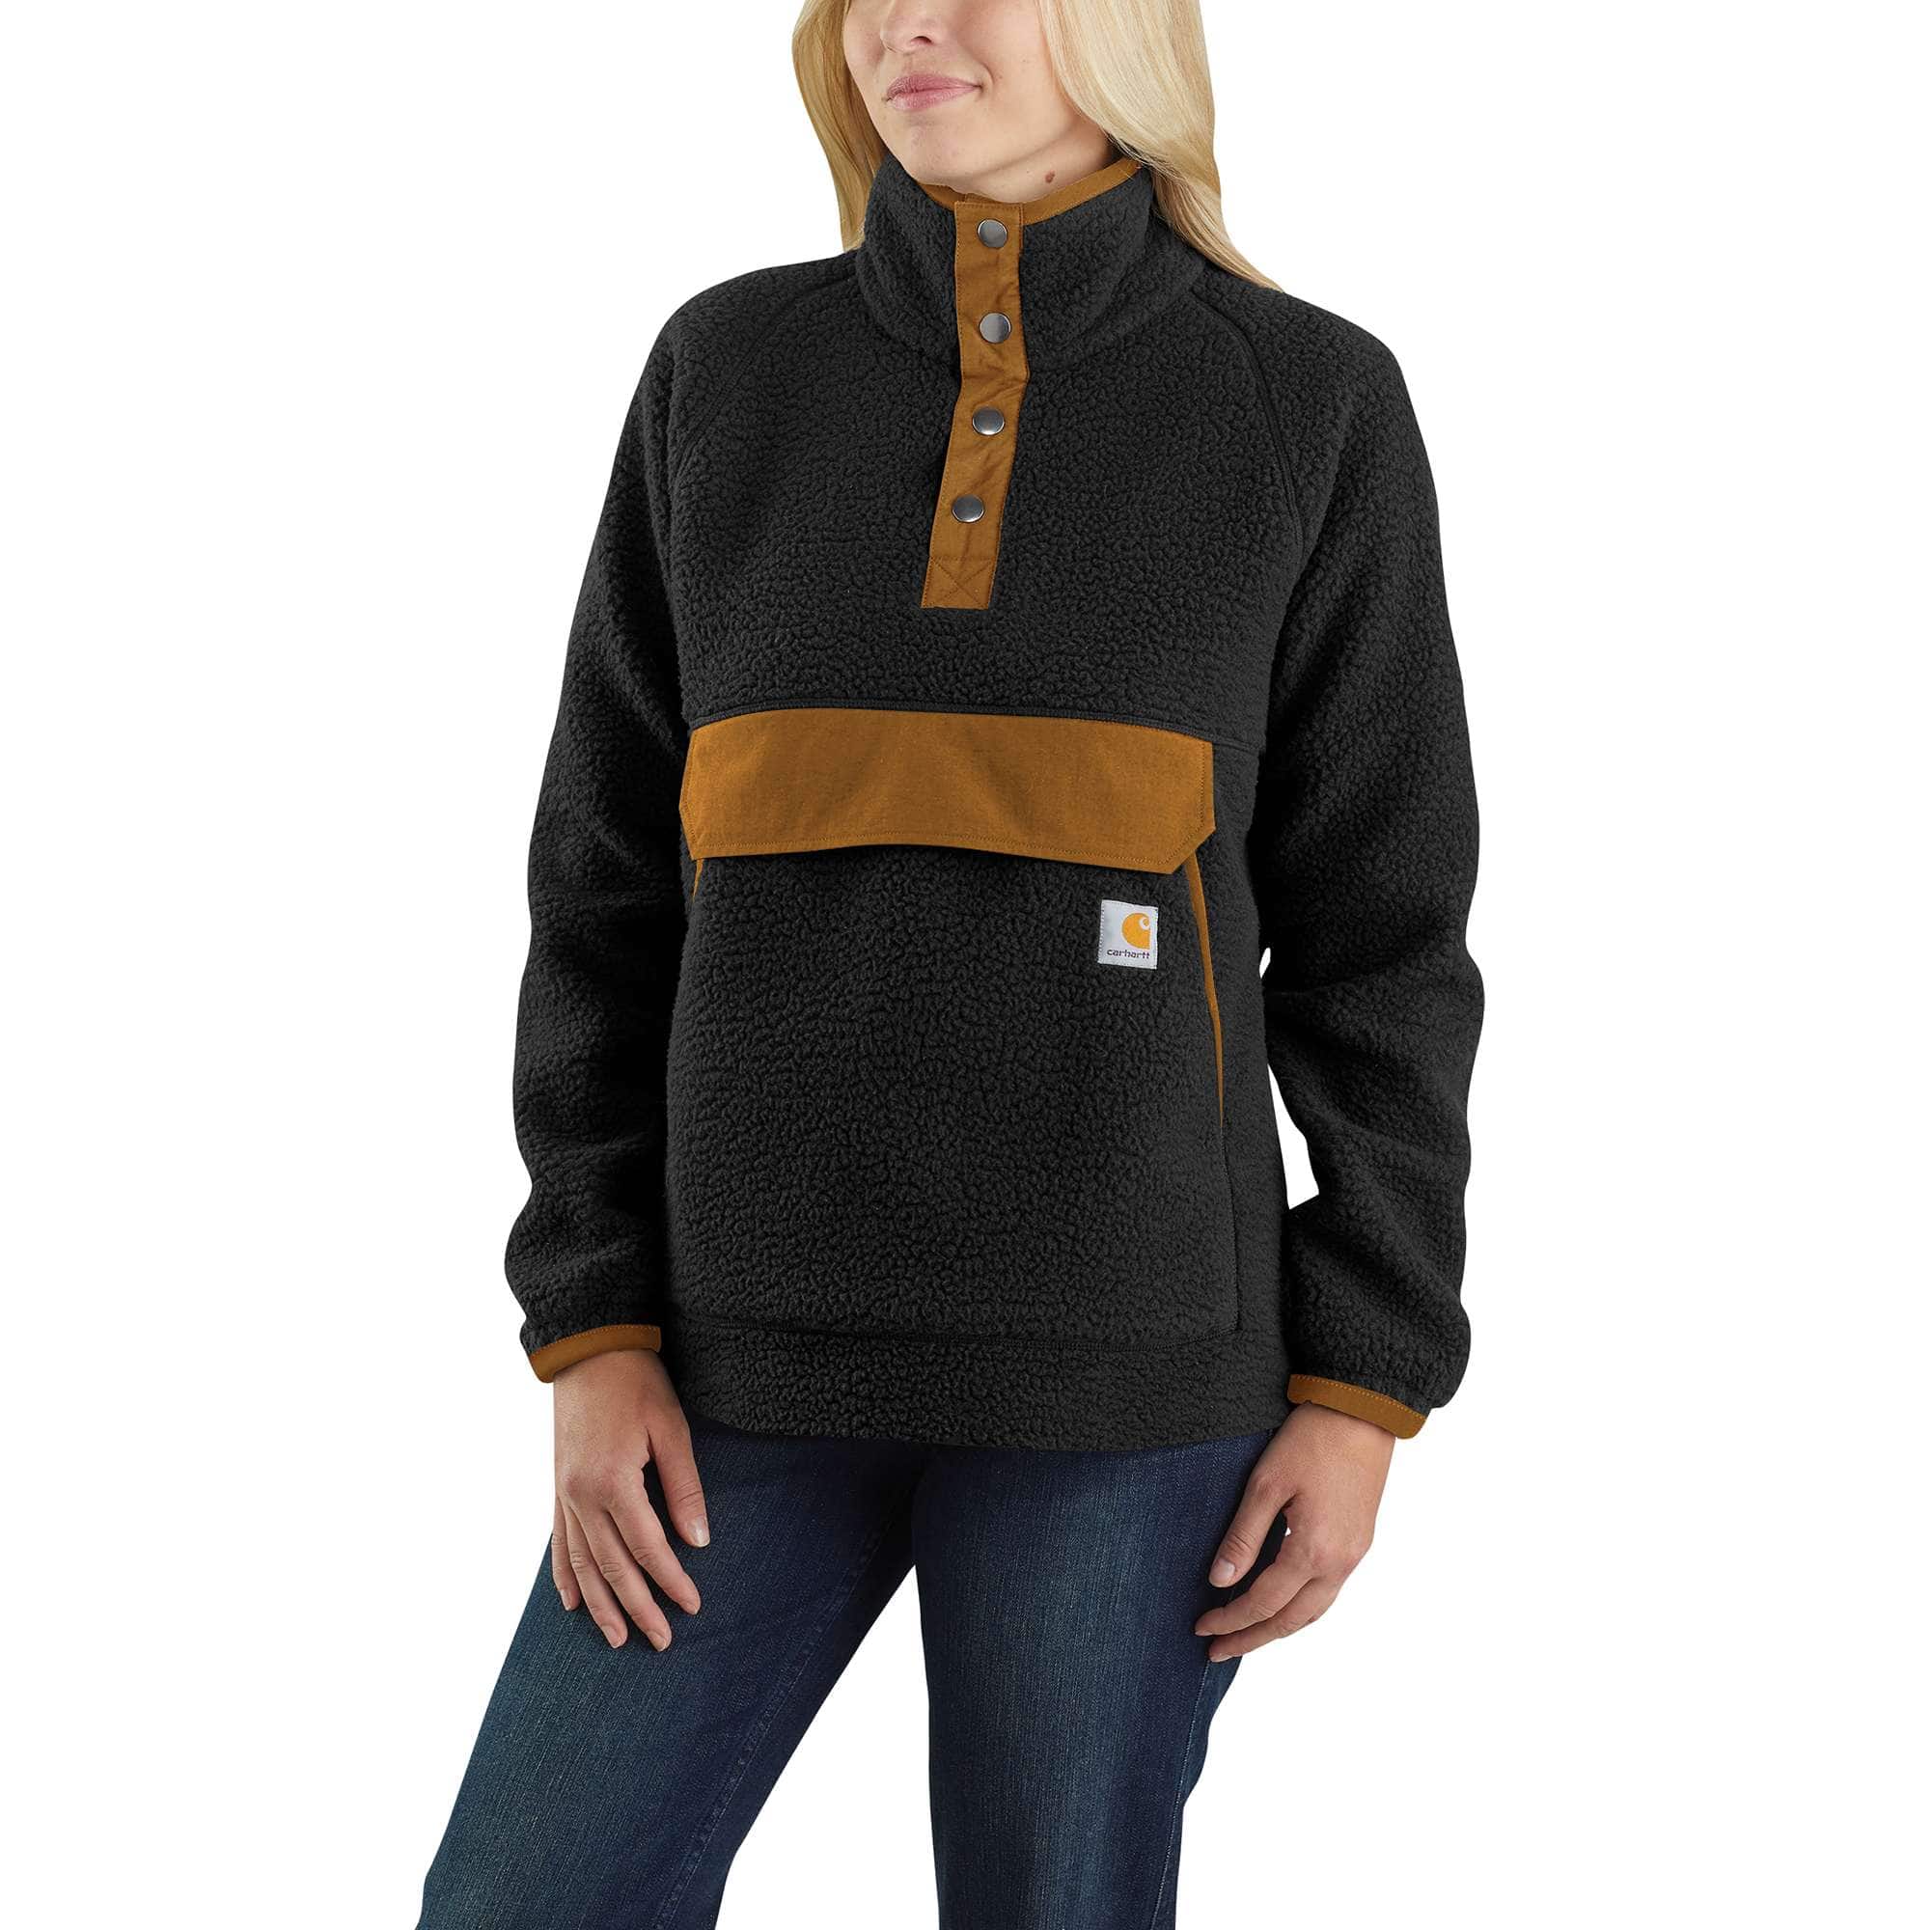 The North Face Women's Cragmont Quarter Zip Jacket, Relaxed Fit